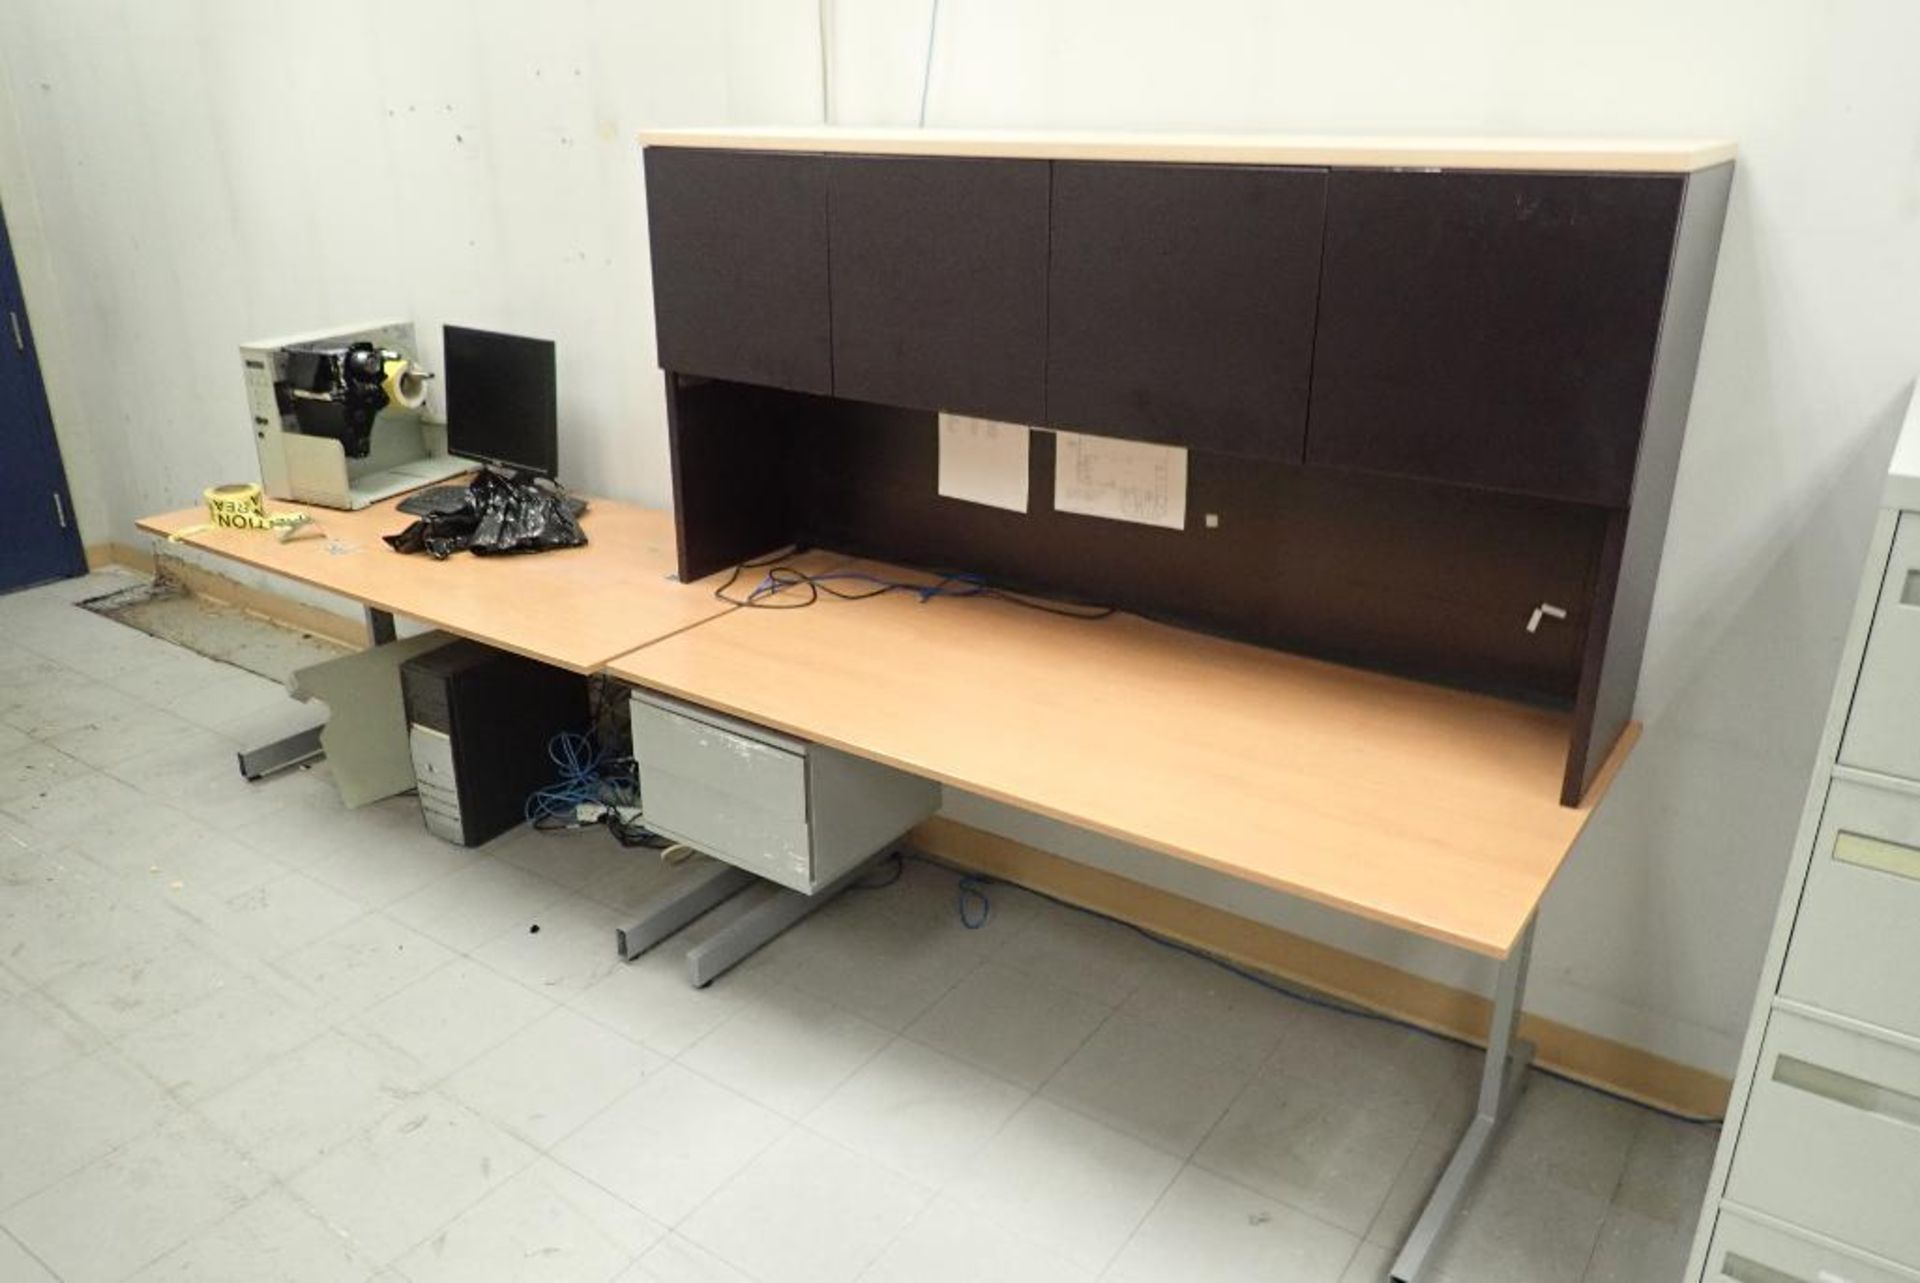 Contents of production office, desks, chairs, filing cabinets, mini fridge, NO IT EQUIPMENT. **Riggi - Image 5 of 5